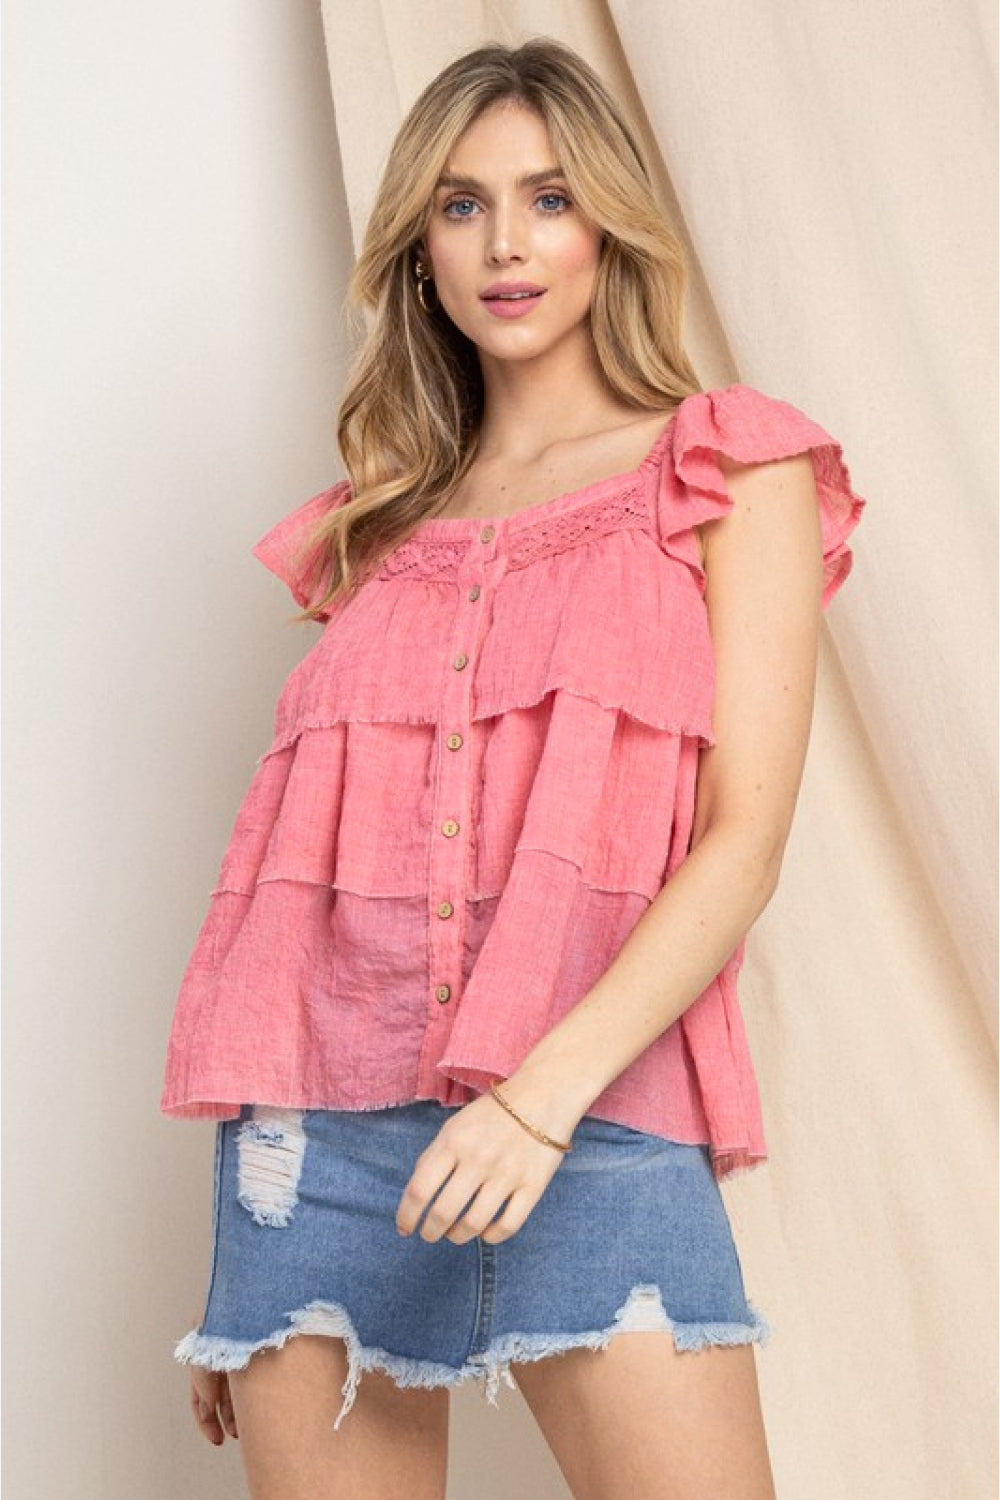 Full Size Buttoned Ruffled Top - Pink / S - Women’s Clothing & Accessories - Shirts & Tops - 1 - 2024